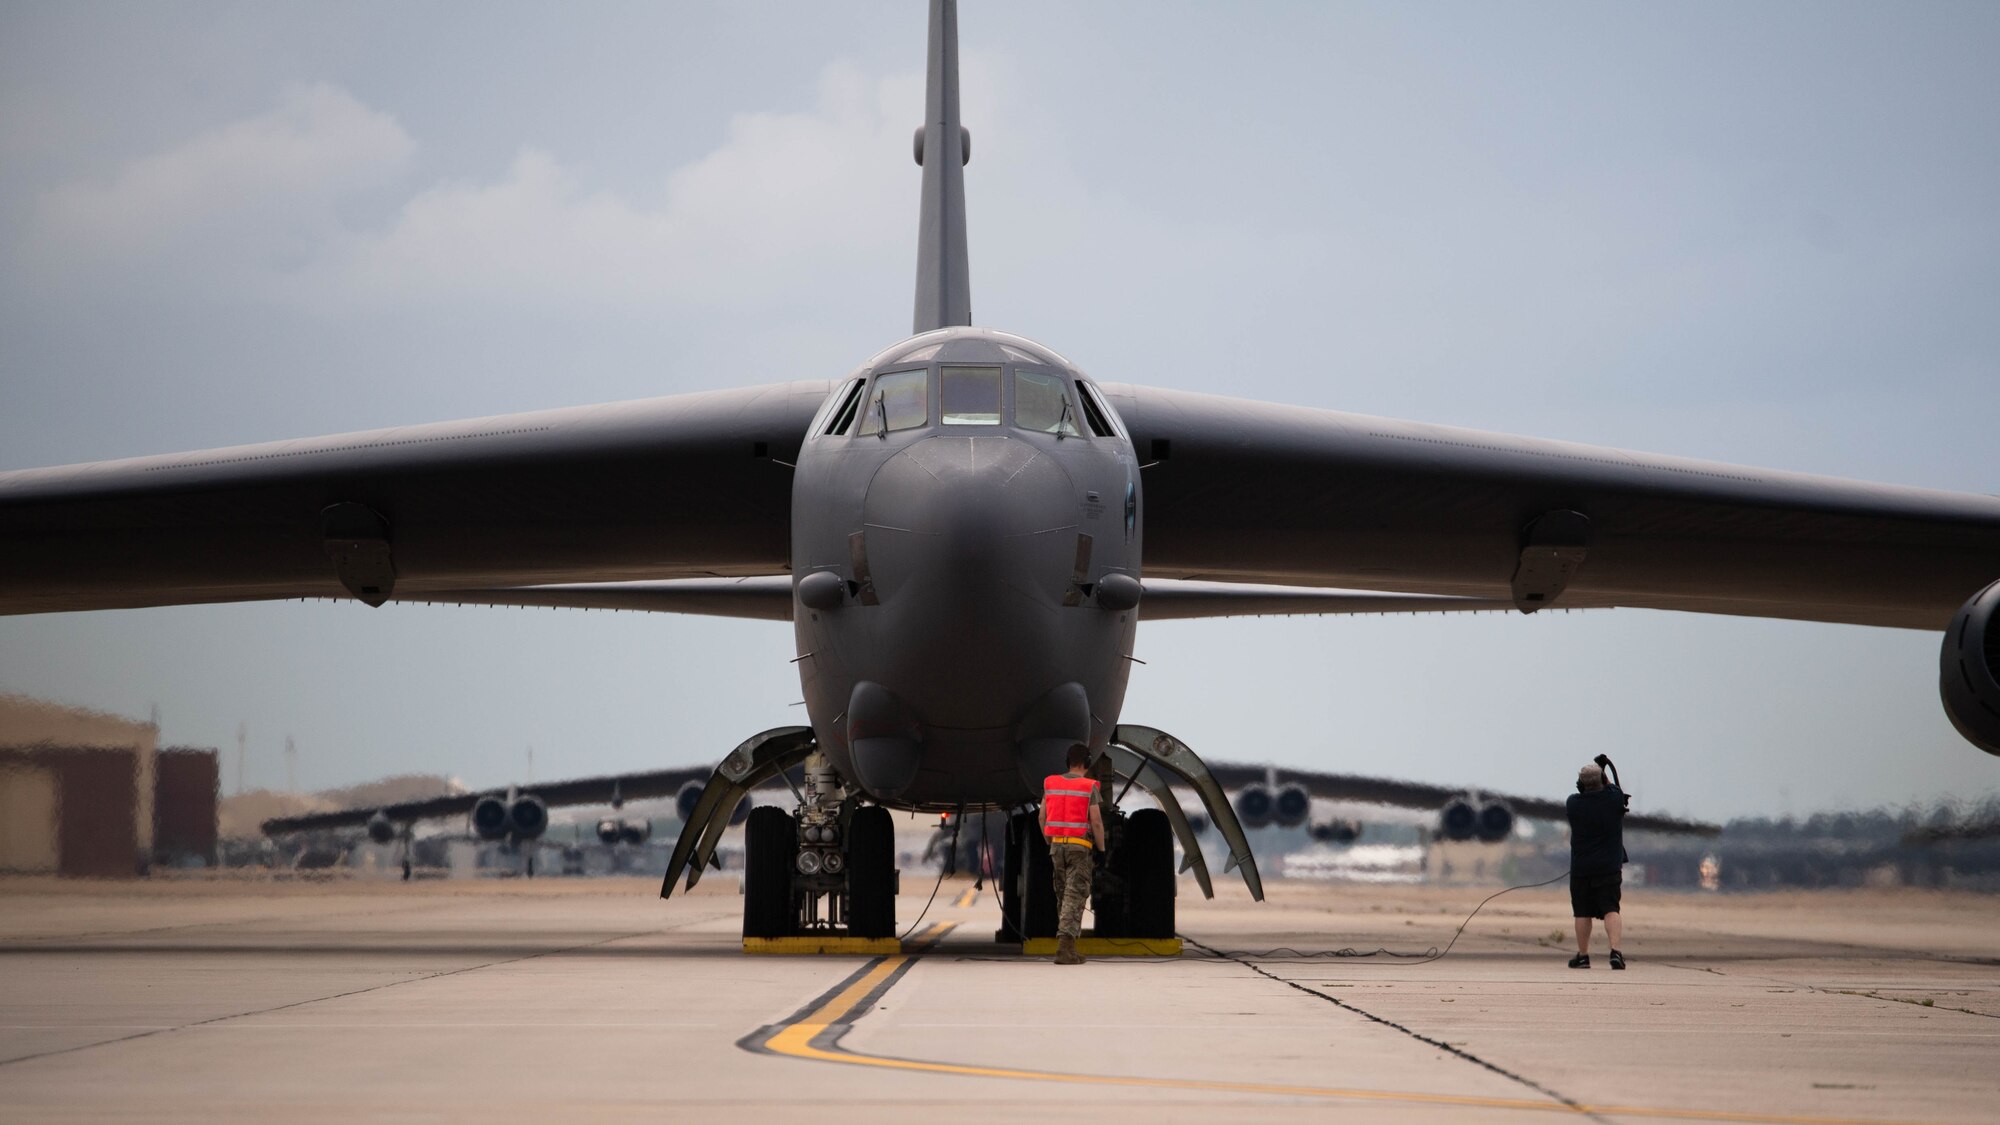 Barksdale Airmen prepare a B-52H Stratofortress for takeoff at Barksdale Air Force Base, Louisiana, May 16, 2021. The bomber is capable of flying at high subsonic speeds at altitudes up to 50,000 feet (15,166.6 meters). It can carry nuclear or precision guided conventional ordnance with worldwide precision navigation capability. (U.S. Air Force photo by Senior Airman Jacob B. Wrightsman)